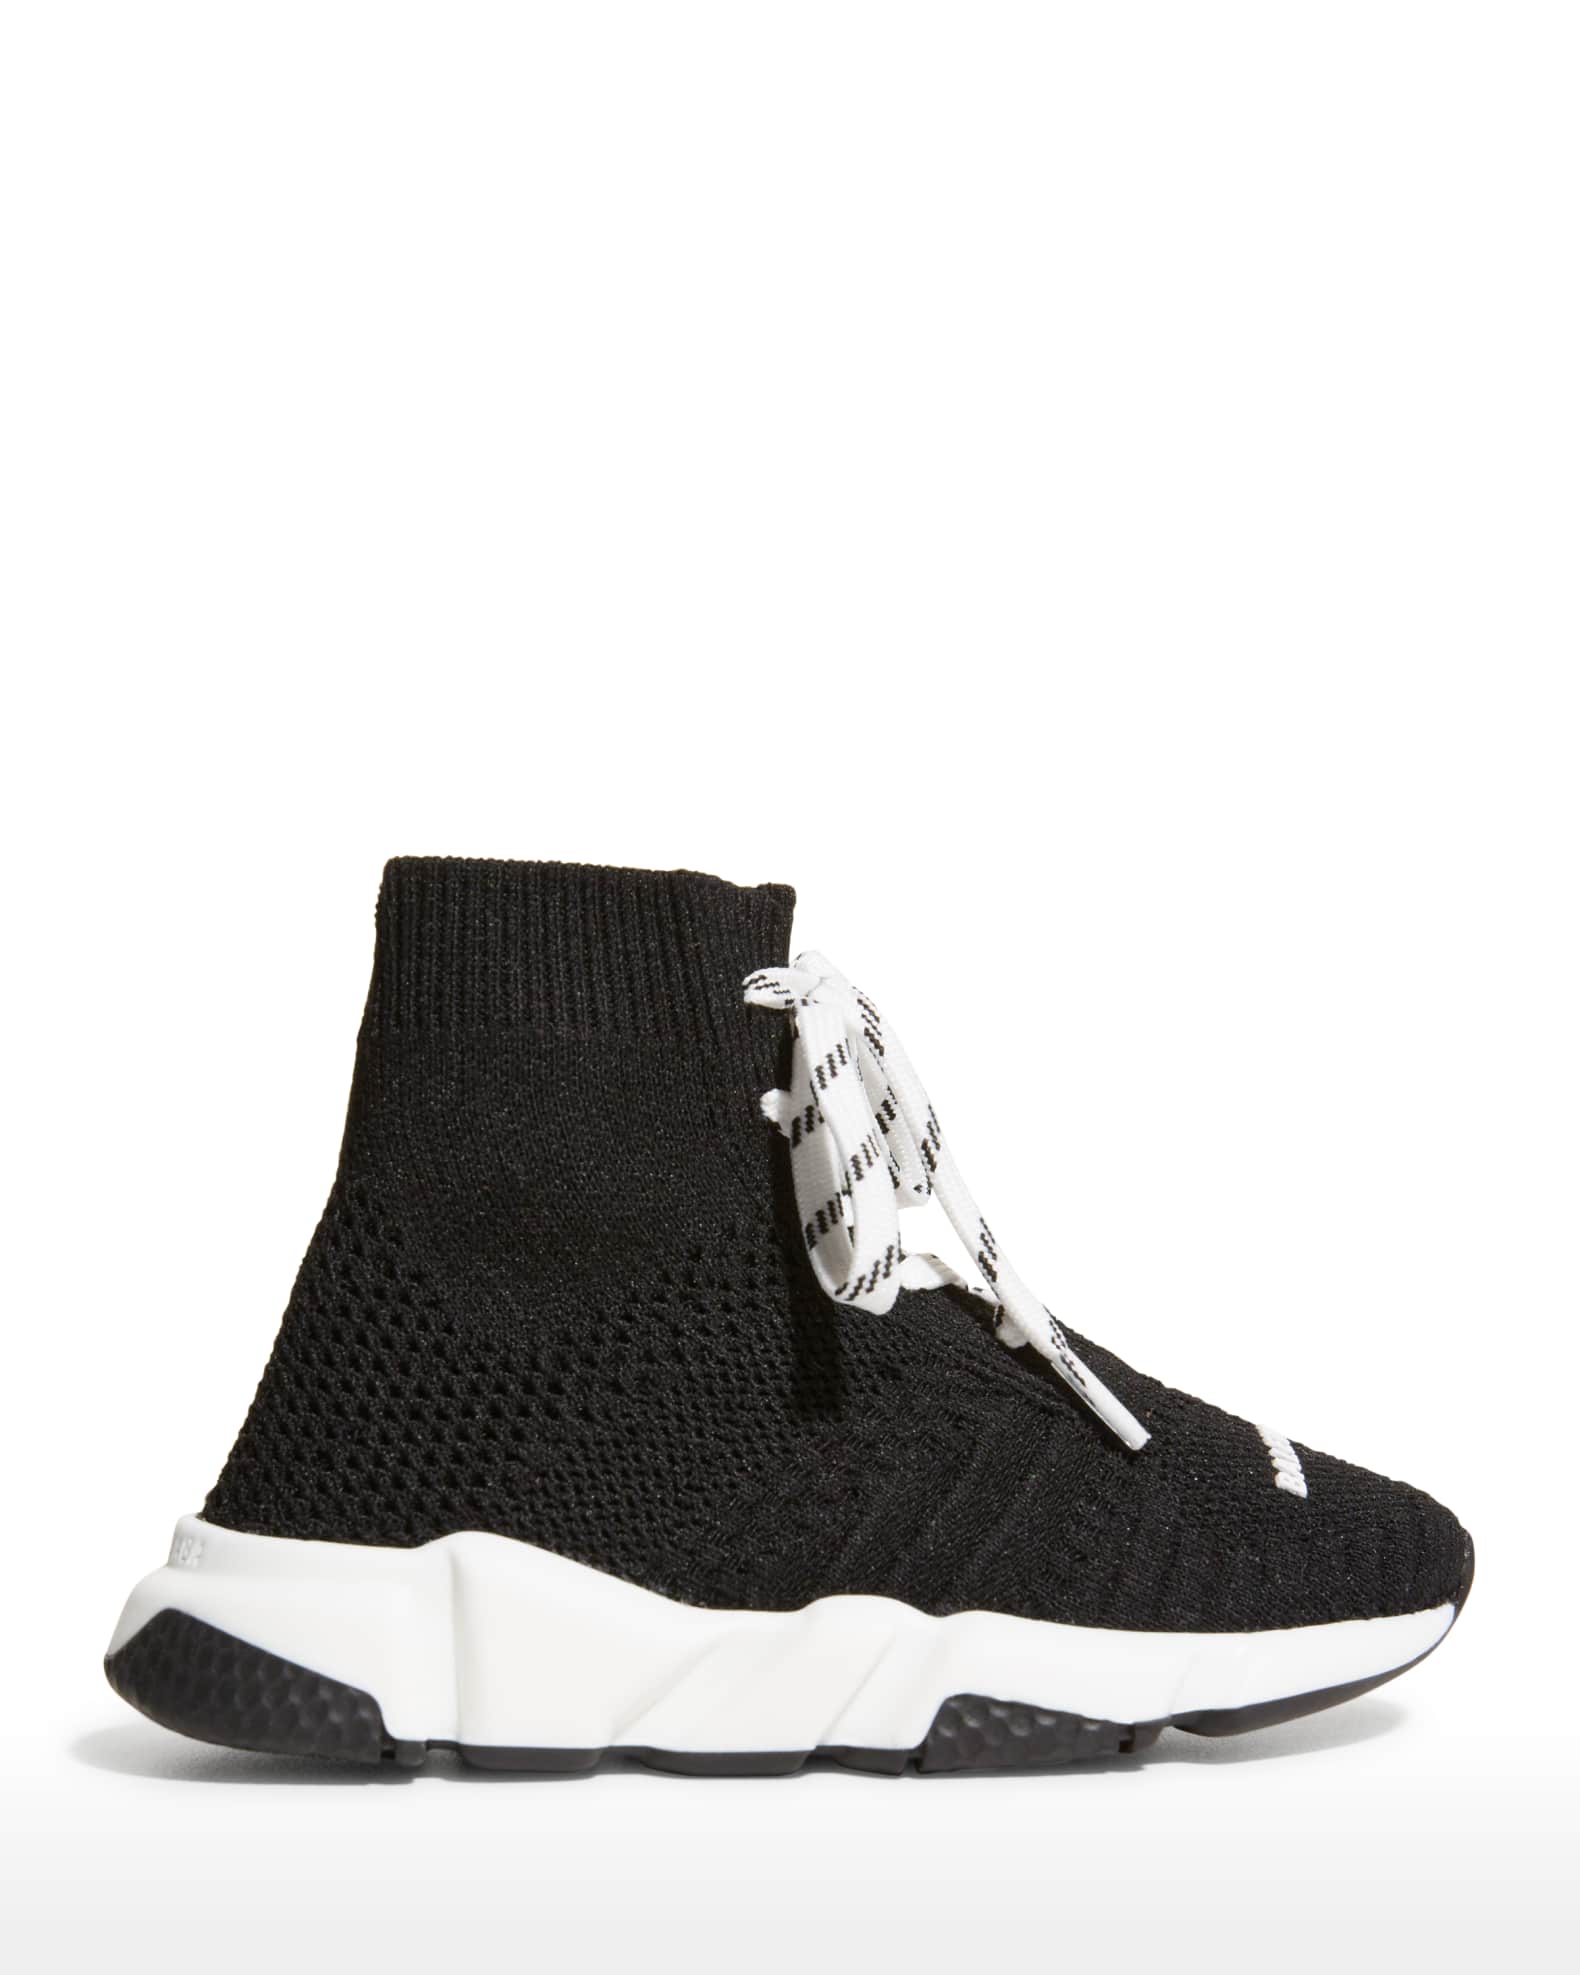 Balenciaga Kid's Speed Lace-Up Sock Sneakers | Neiman Marcus